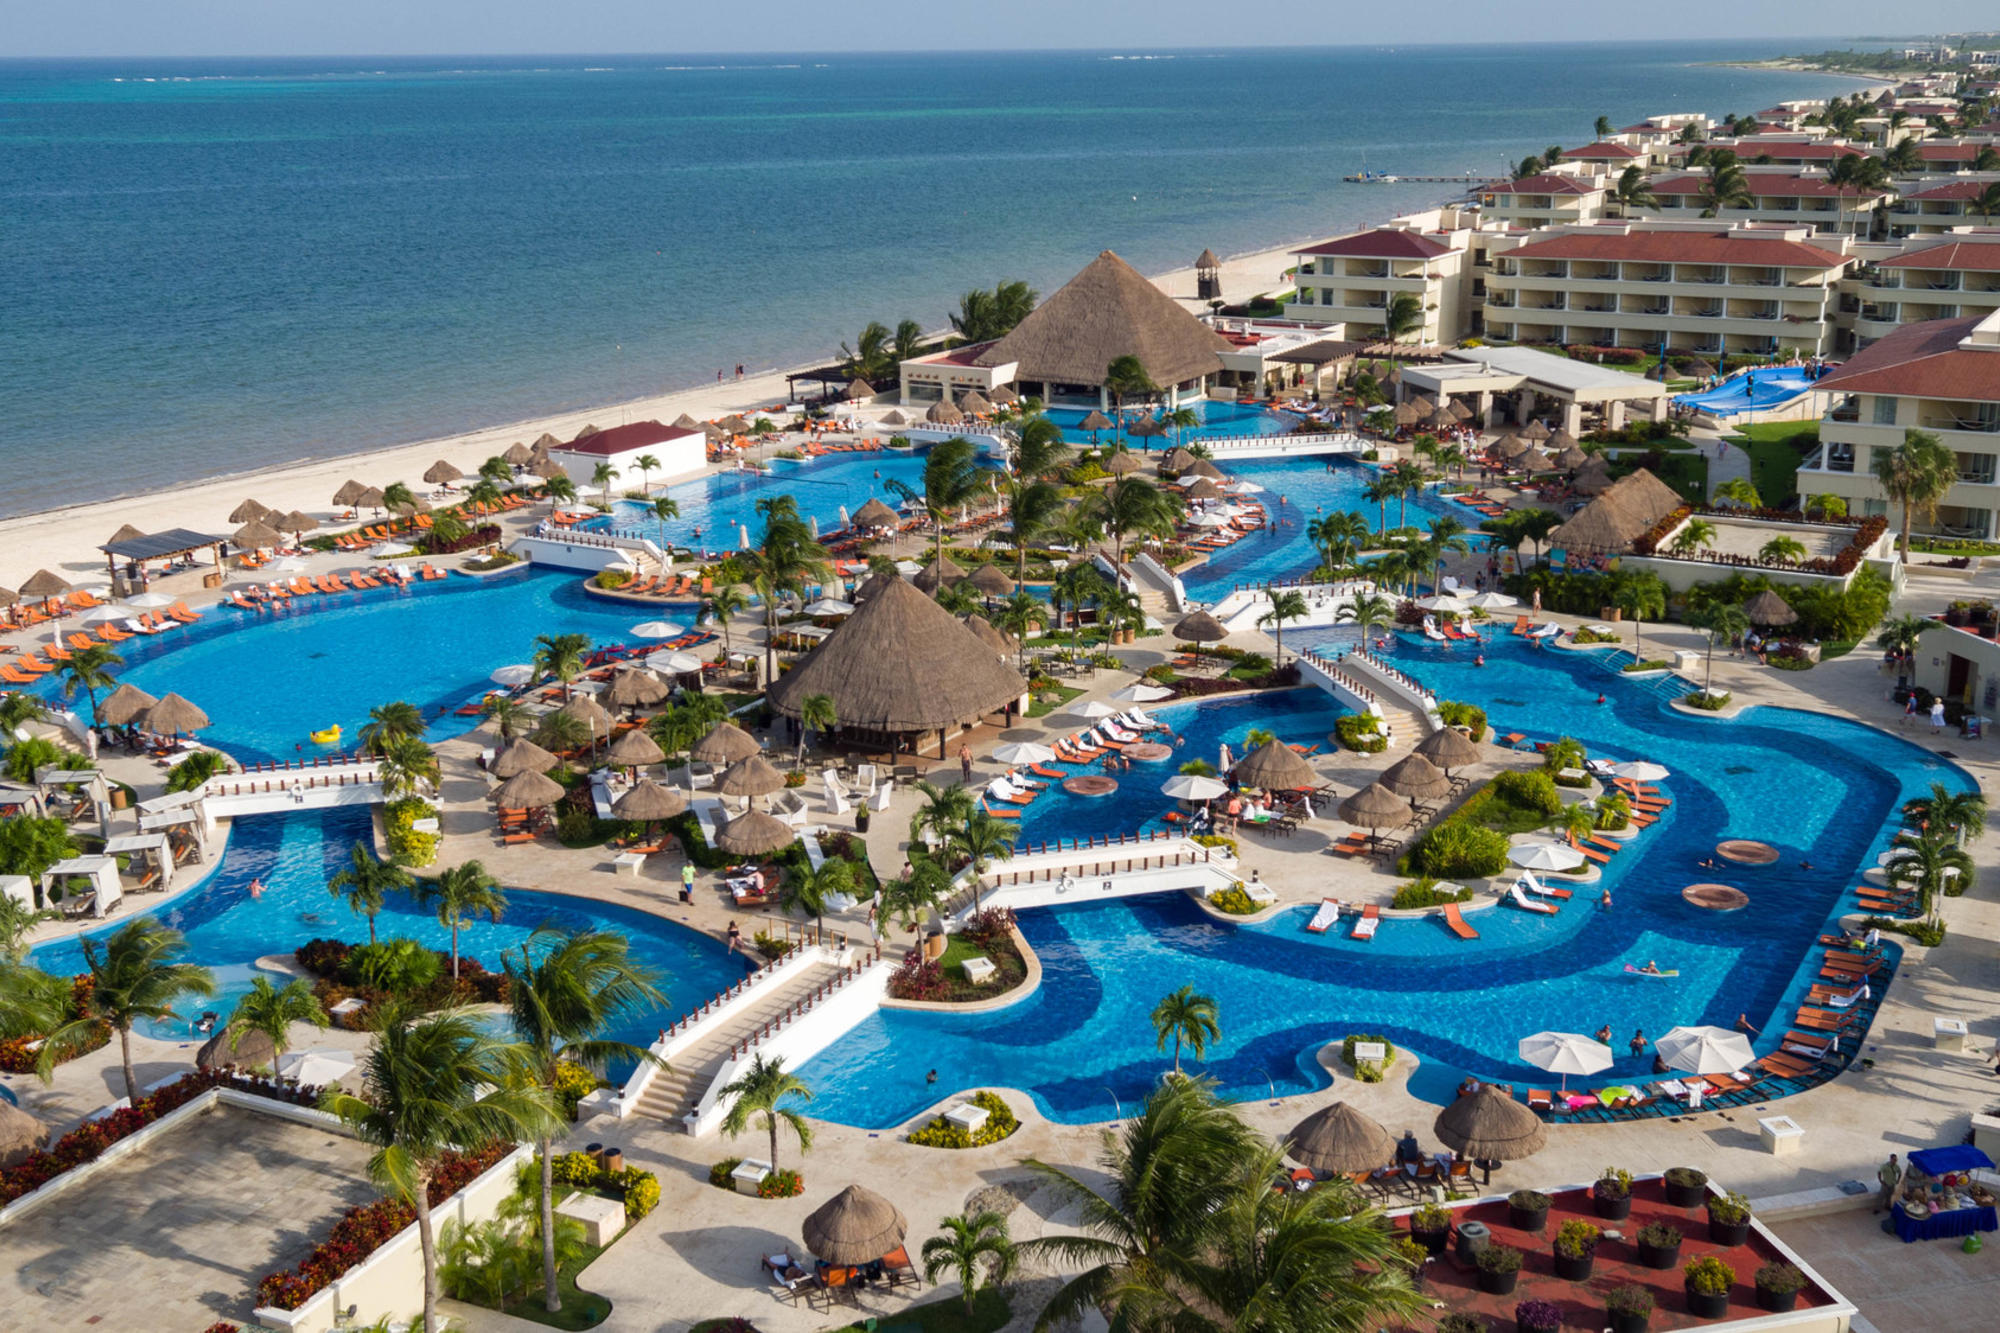 The pool complex and beach at Moon Palace Cancun